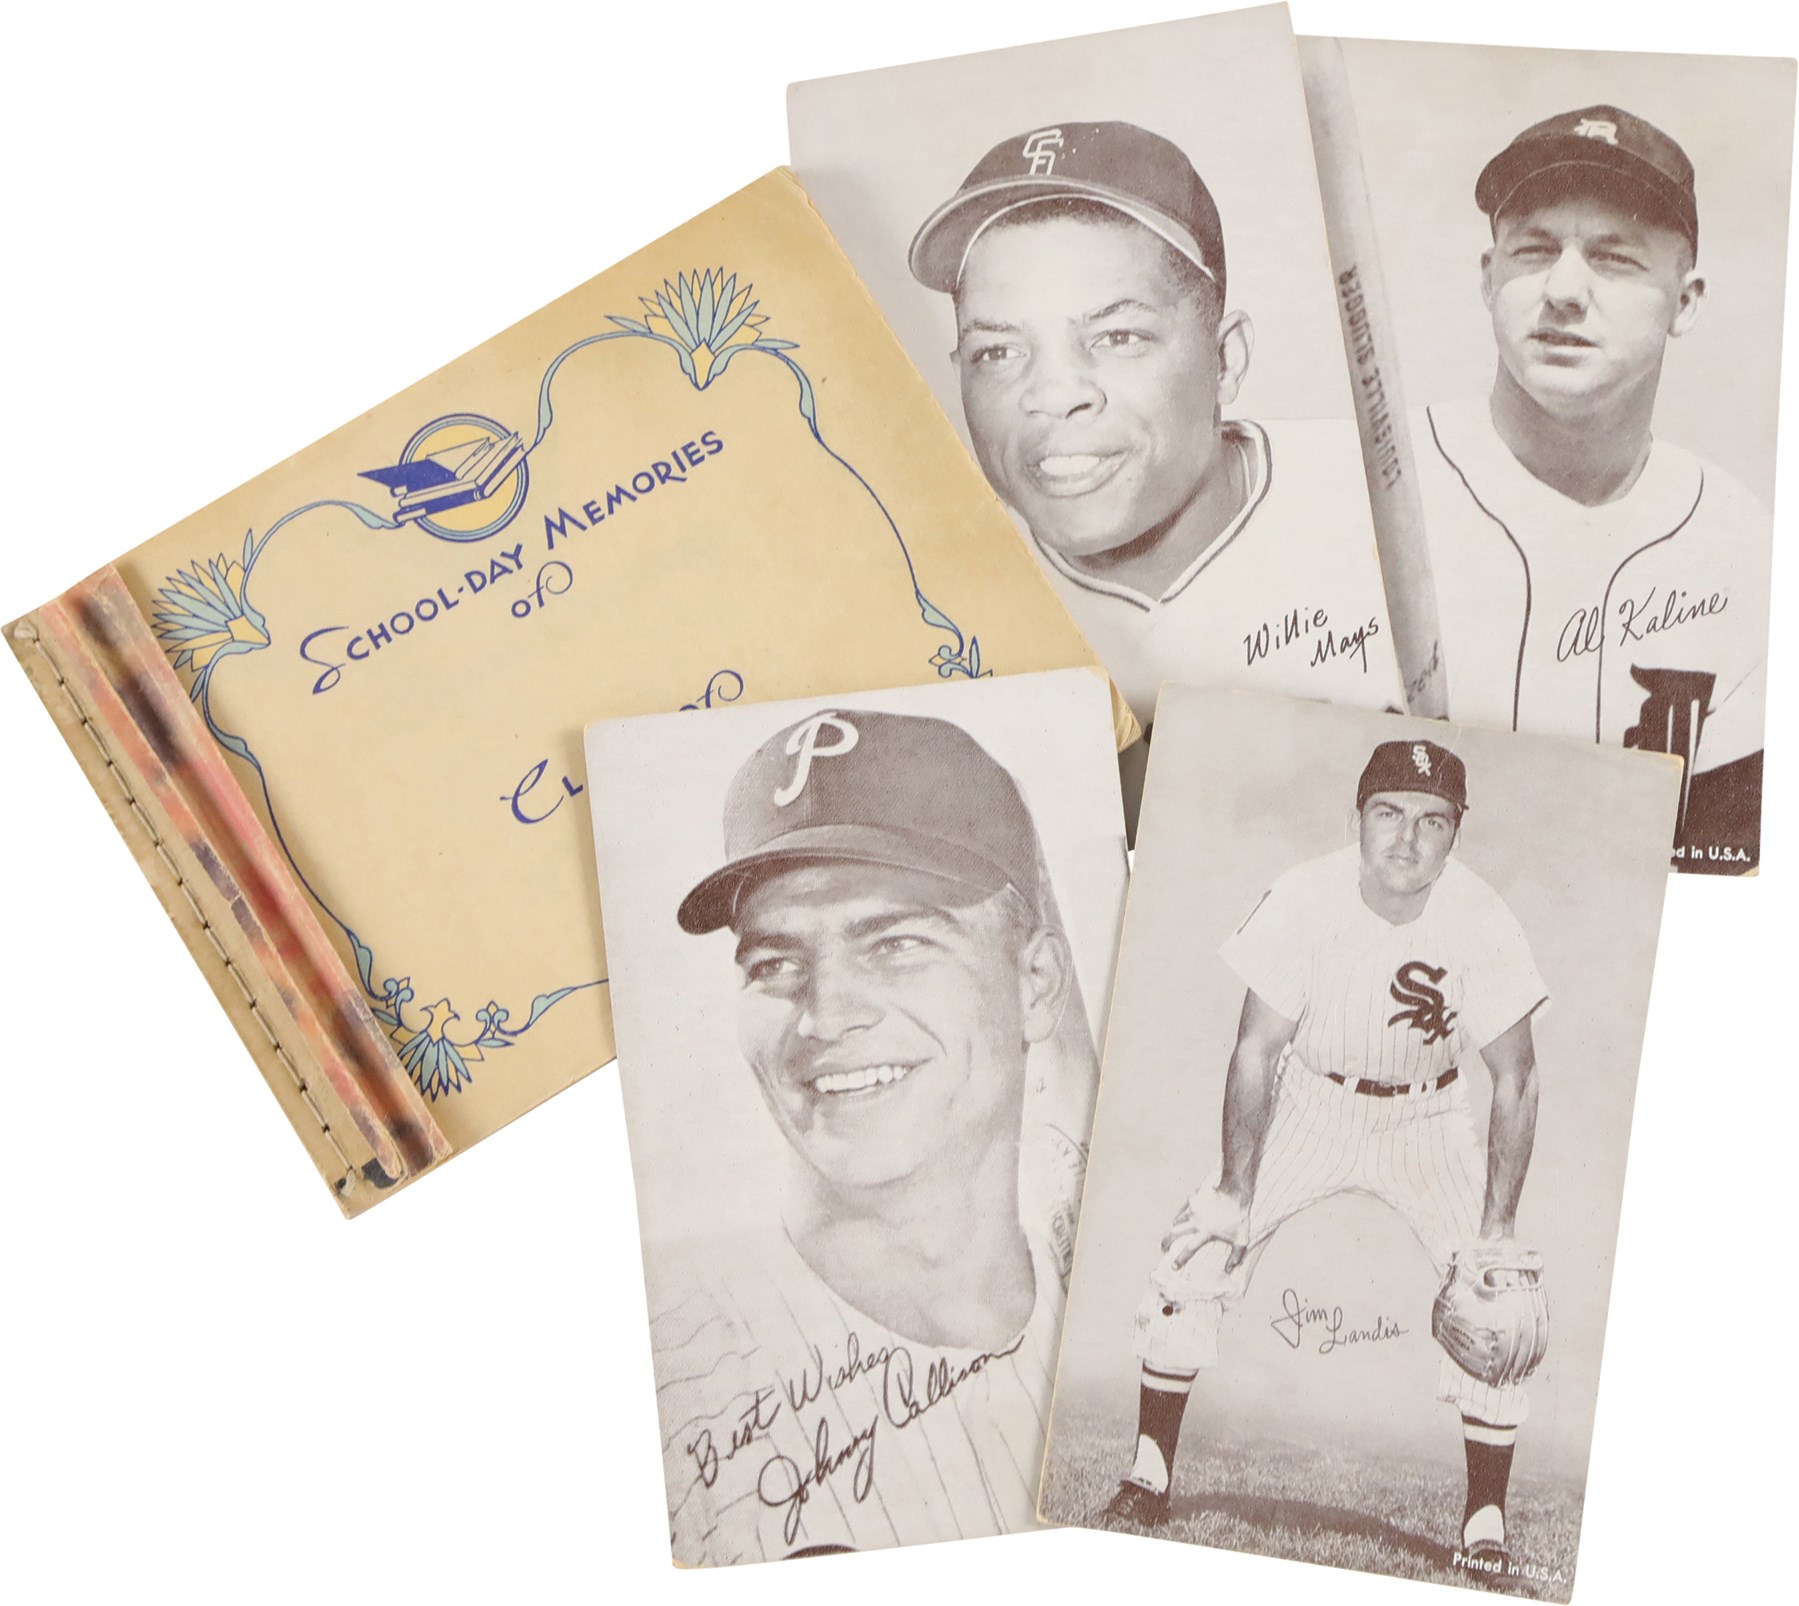 Baseball Autographs - Hall of Famers and Stars Autograph Album with Exhibit Cards (20+ Autos)